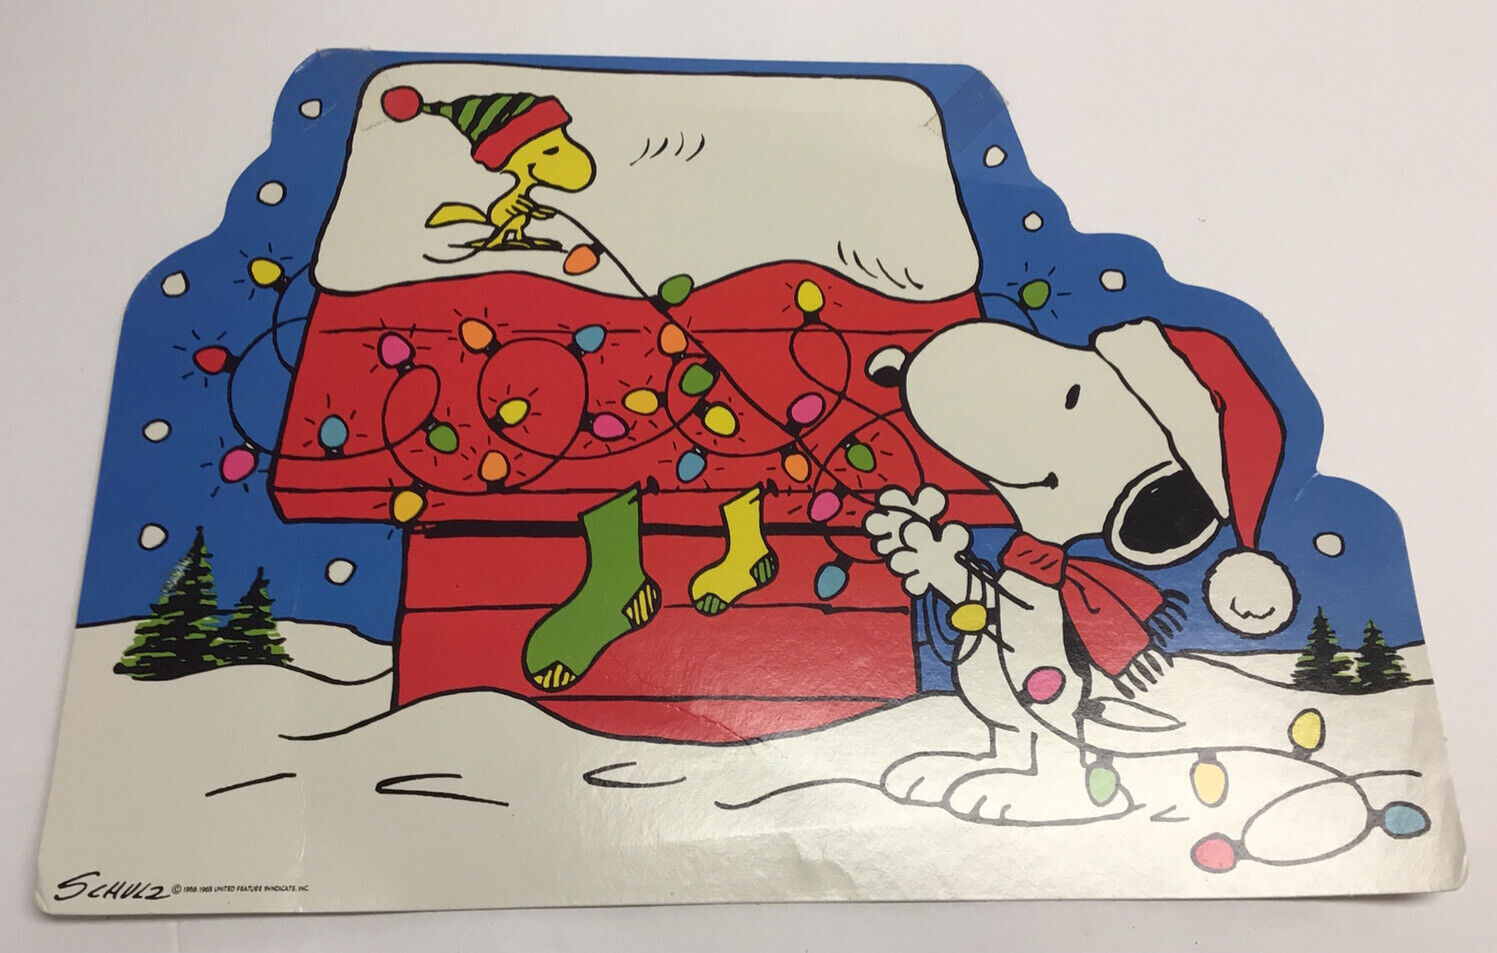 Vintage SMALL 1965 PEANUTS SCHULZ SNOOPY WOODSTOCK MERRY CHRISTMAS